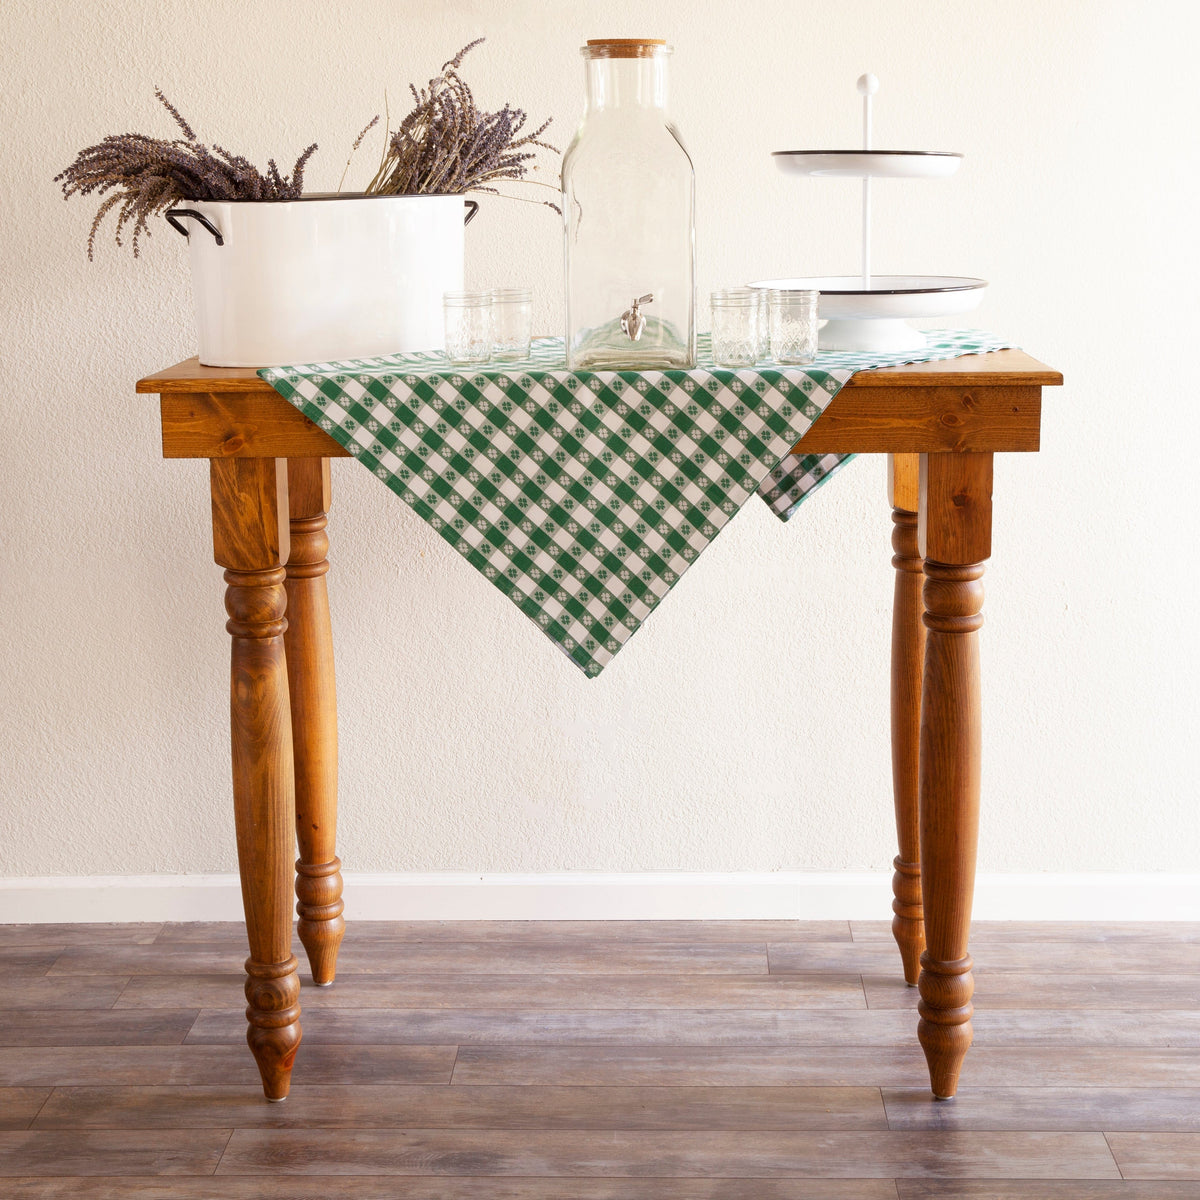 Rustic farm cocktail table with linen check tablecloth and vintage enamel tableware